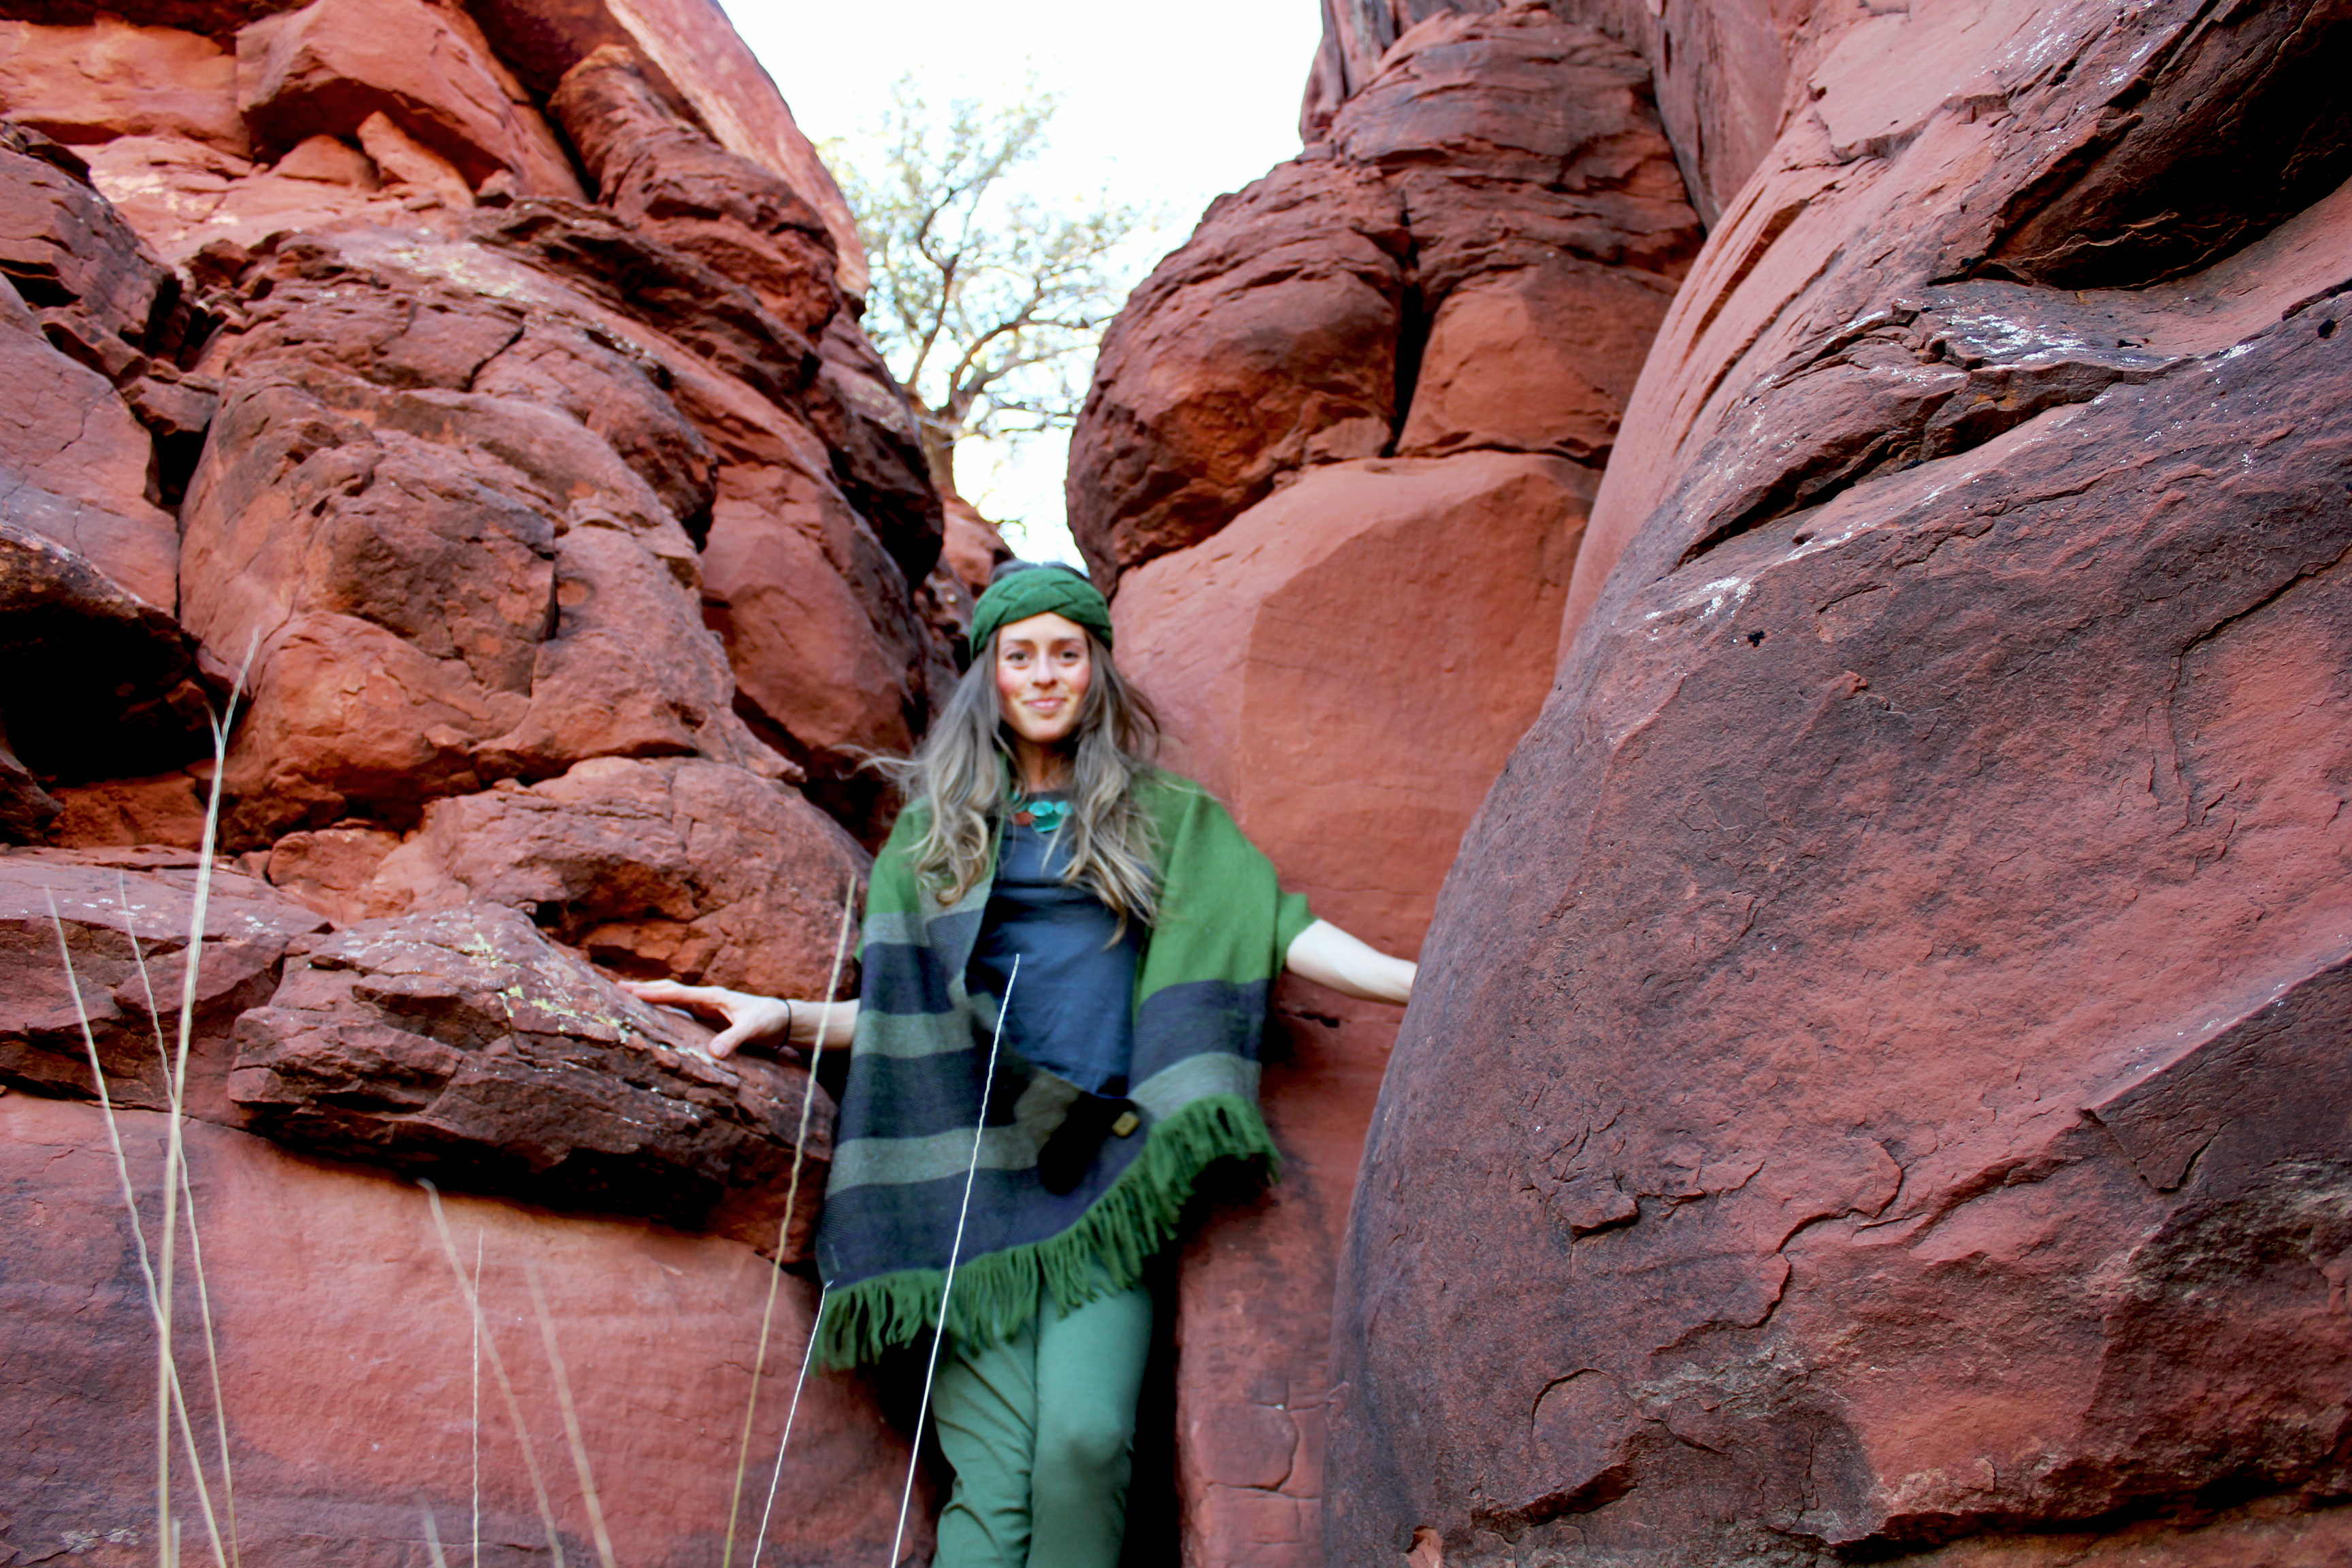 Girl in red rocks with eco-green outfit